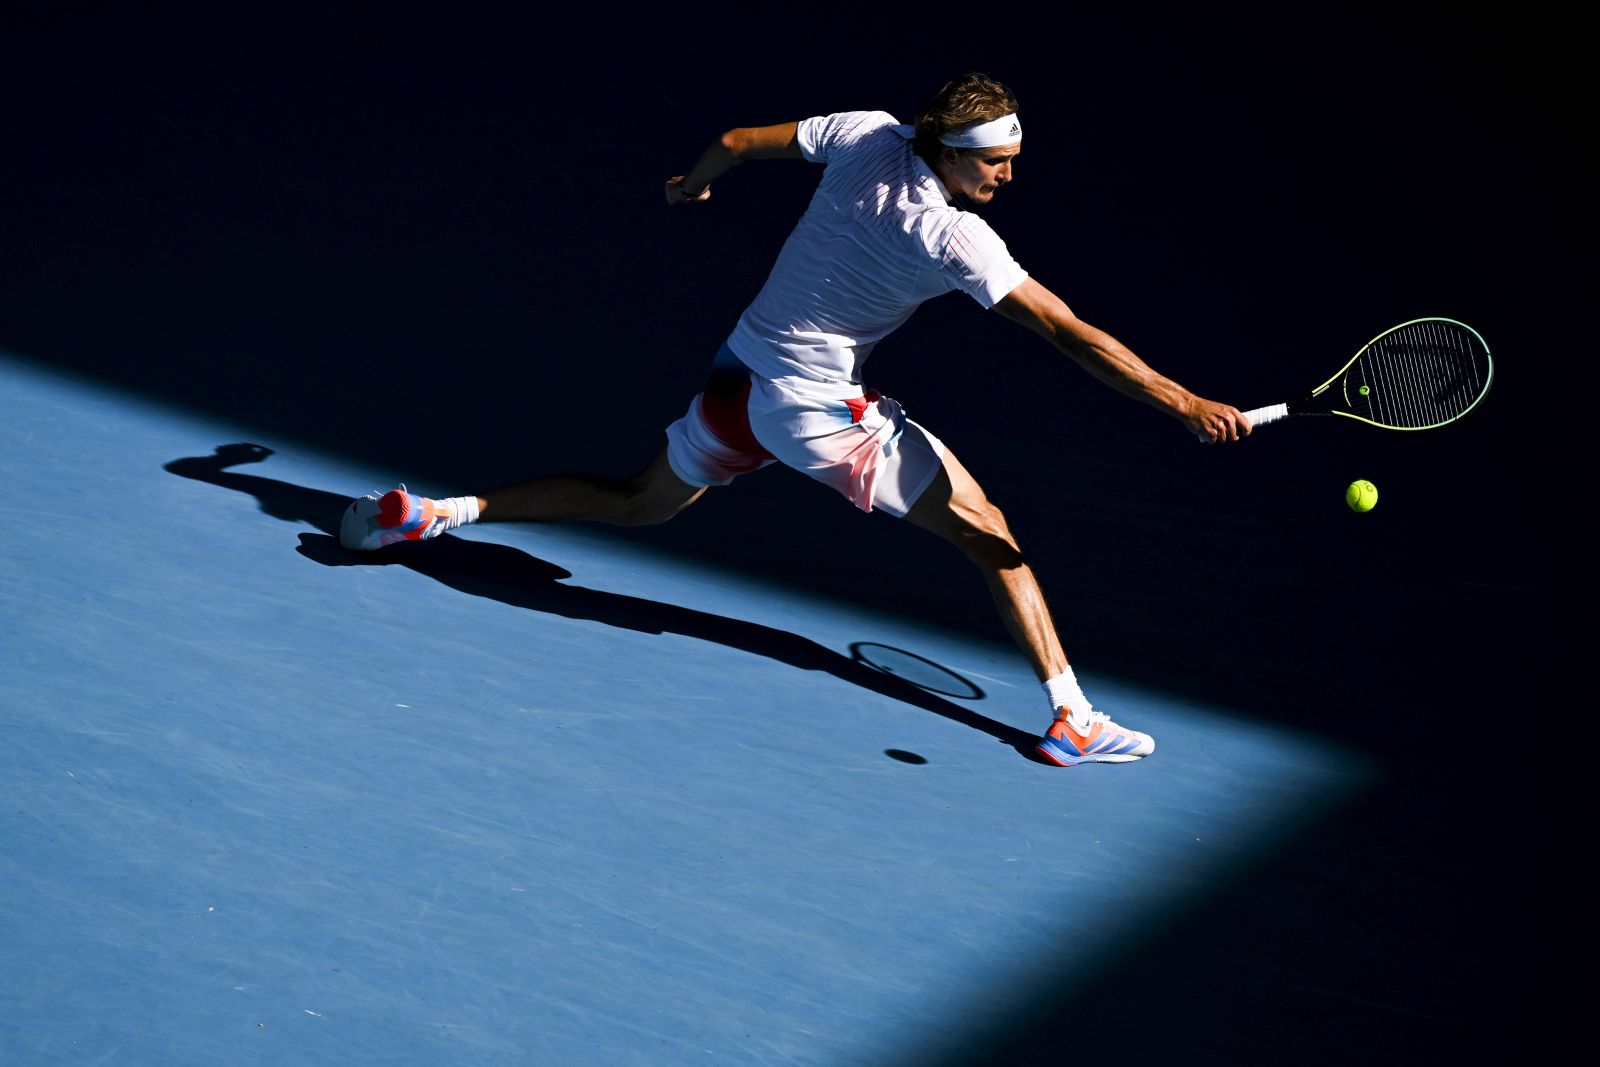 epa09703495 Alexander Zverev of Germany returns to Denis Shapovalov of Canada in their fourth round match during the Australian Open Grand Slam tennis tournament in Melbourne, Australia, 23 January 2022.  EPA/DEAN LEWINS  AUSTRALIA AND NEW ZEALAND OUT